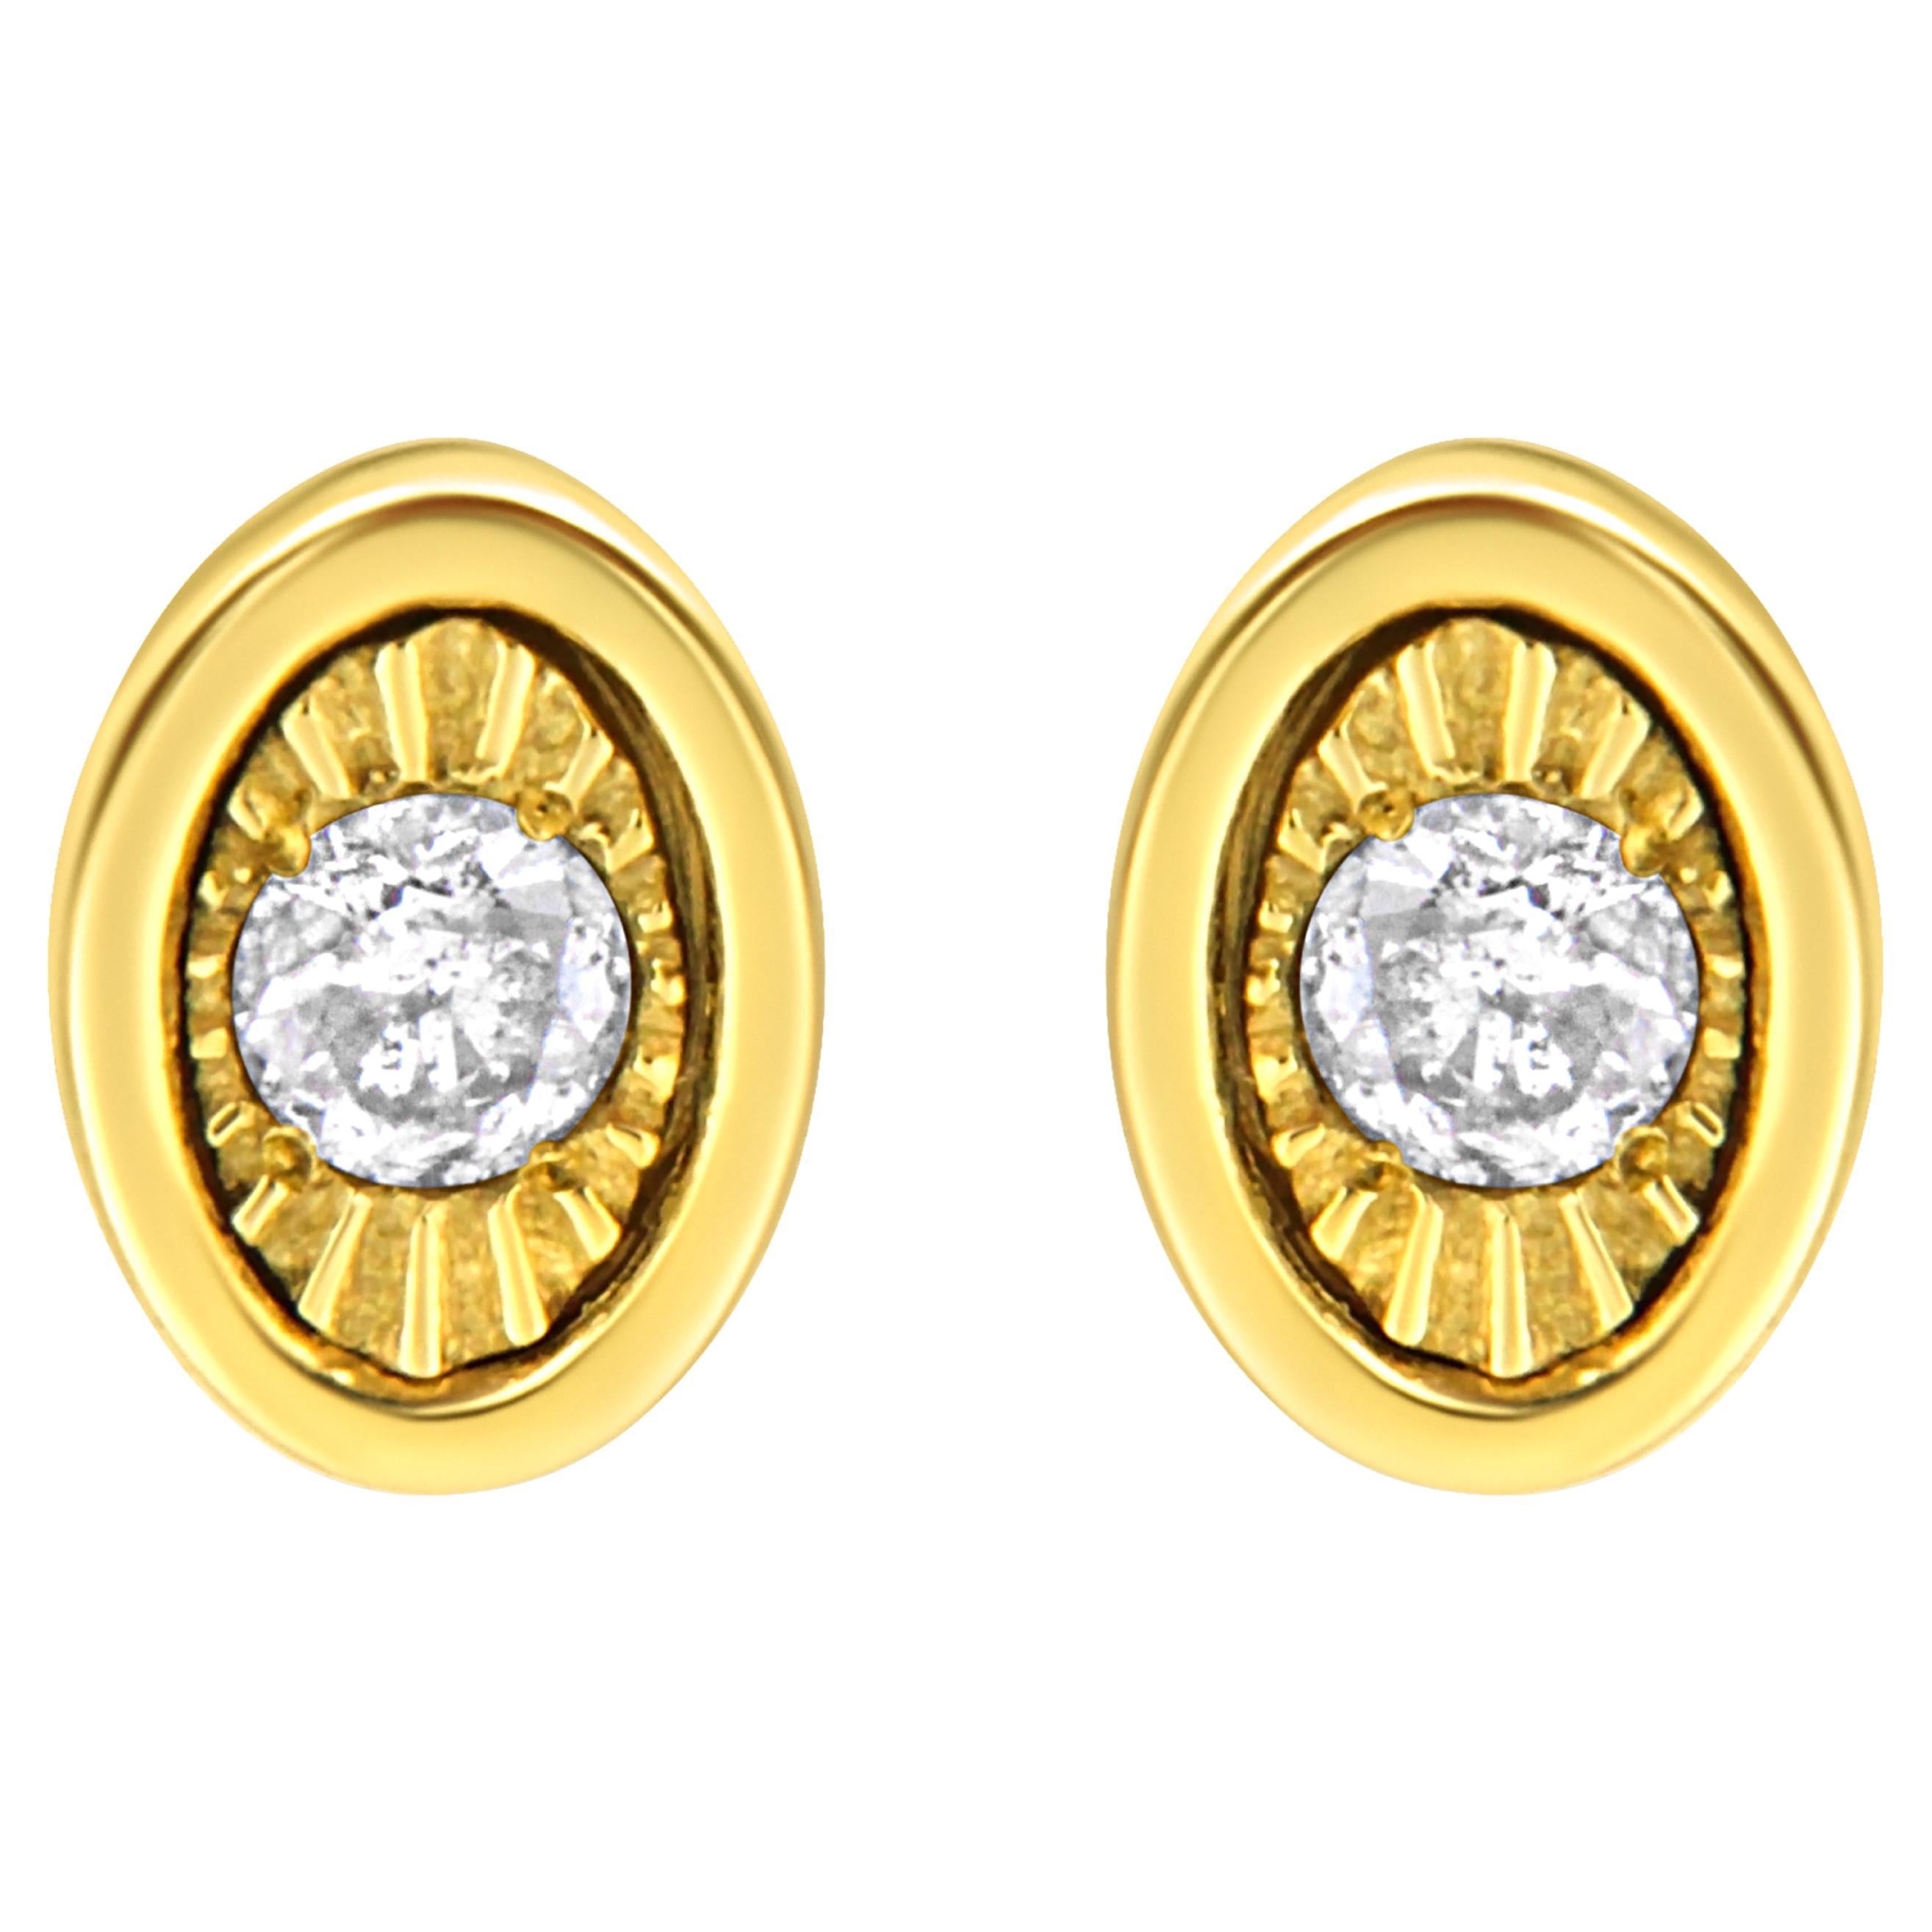 Yellow Gold Plated Sterling Silver 1/10 Carat Diamond Oval Shape Stud Earrings